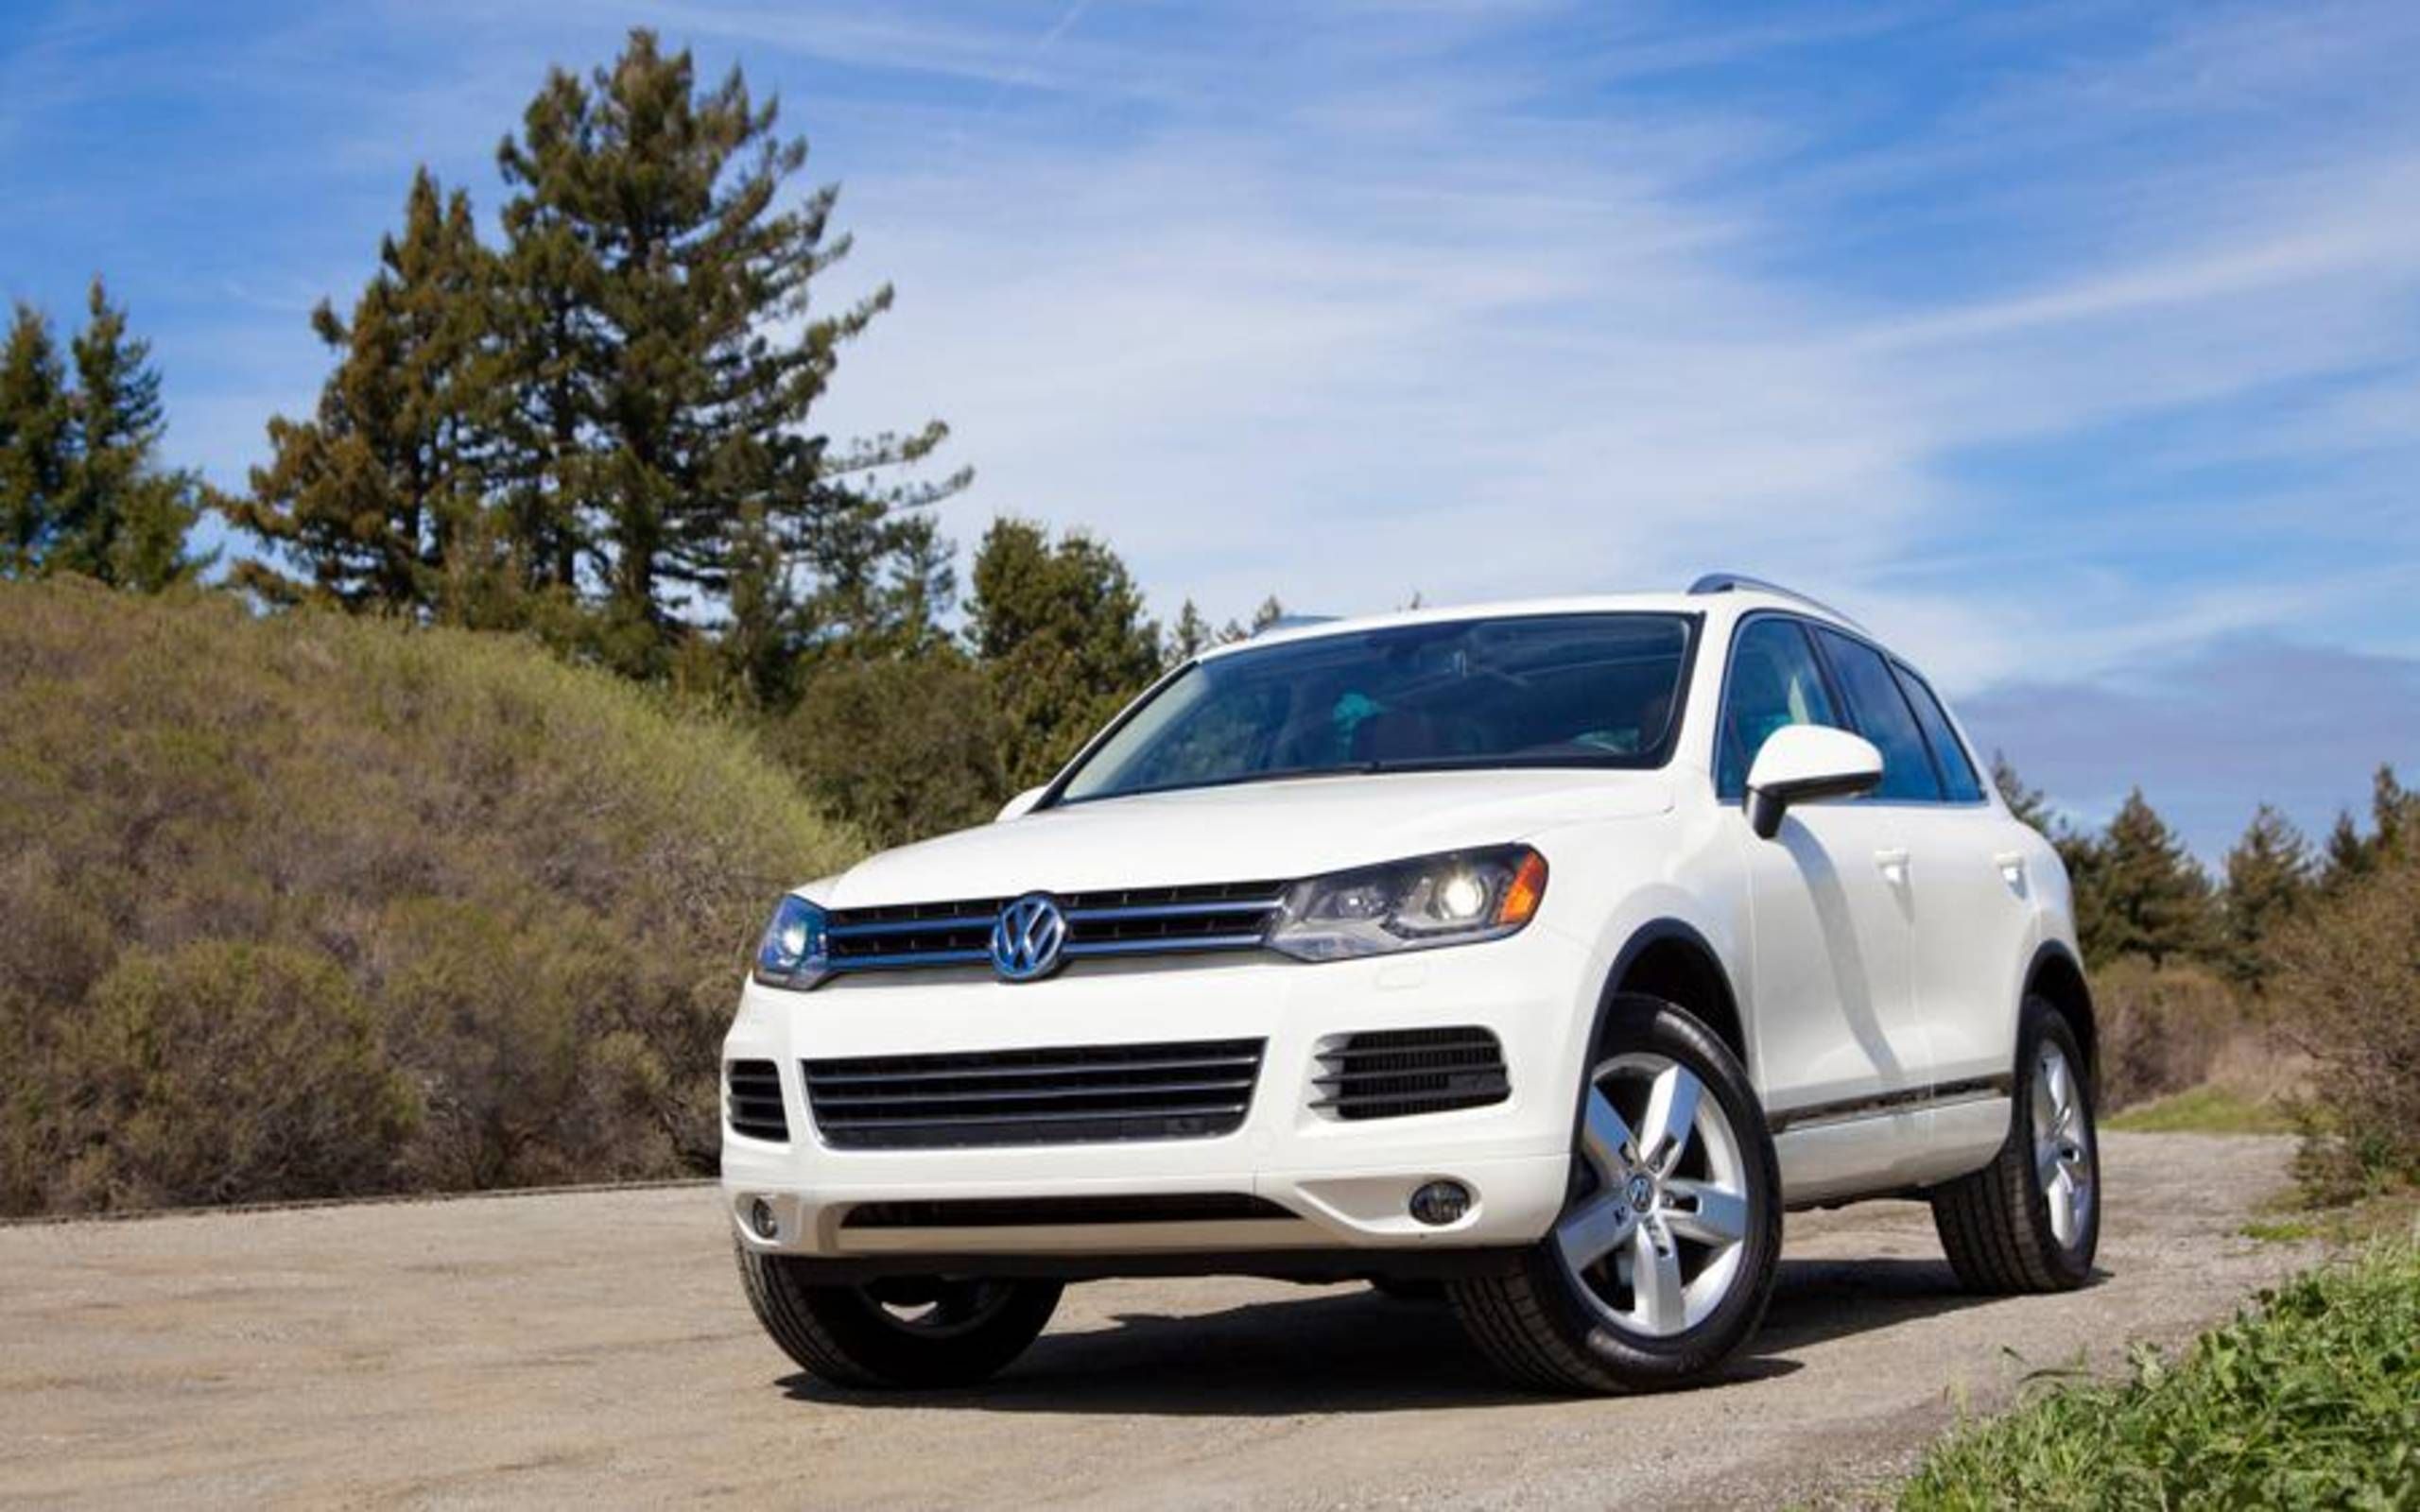 2012 Volkswagen Touareg TDI Lux review notes: The diesel is our VW Touareg  of choice